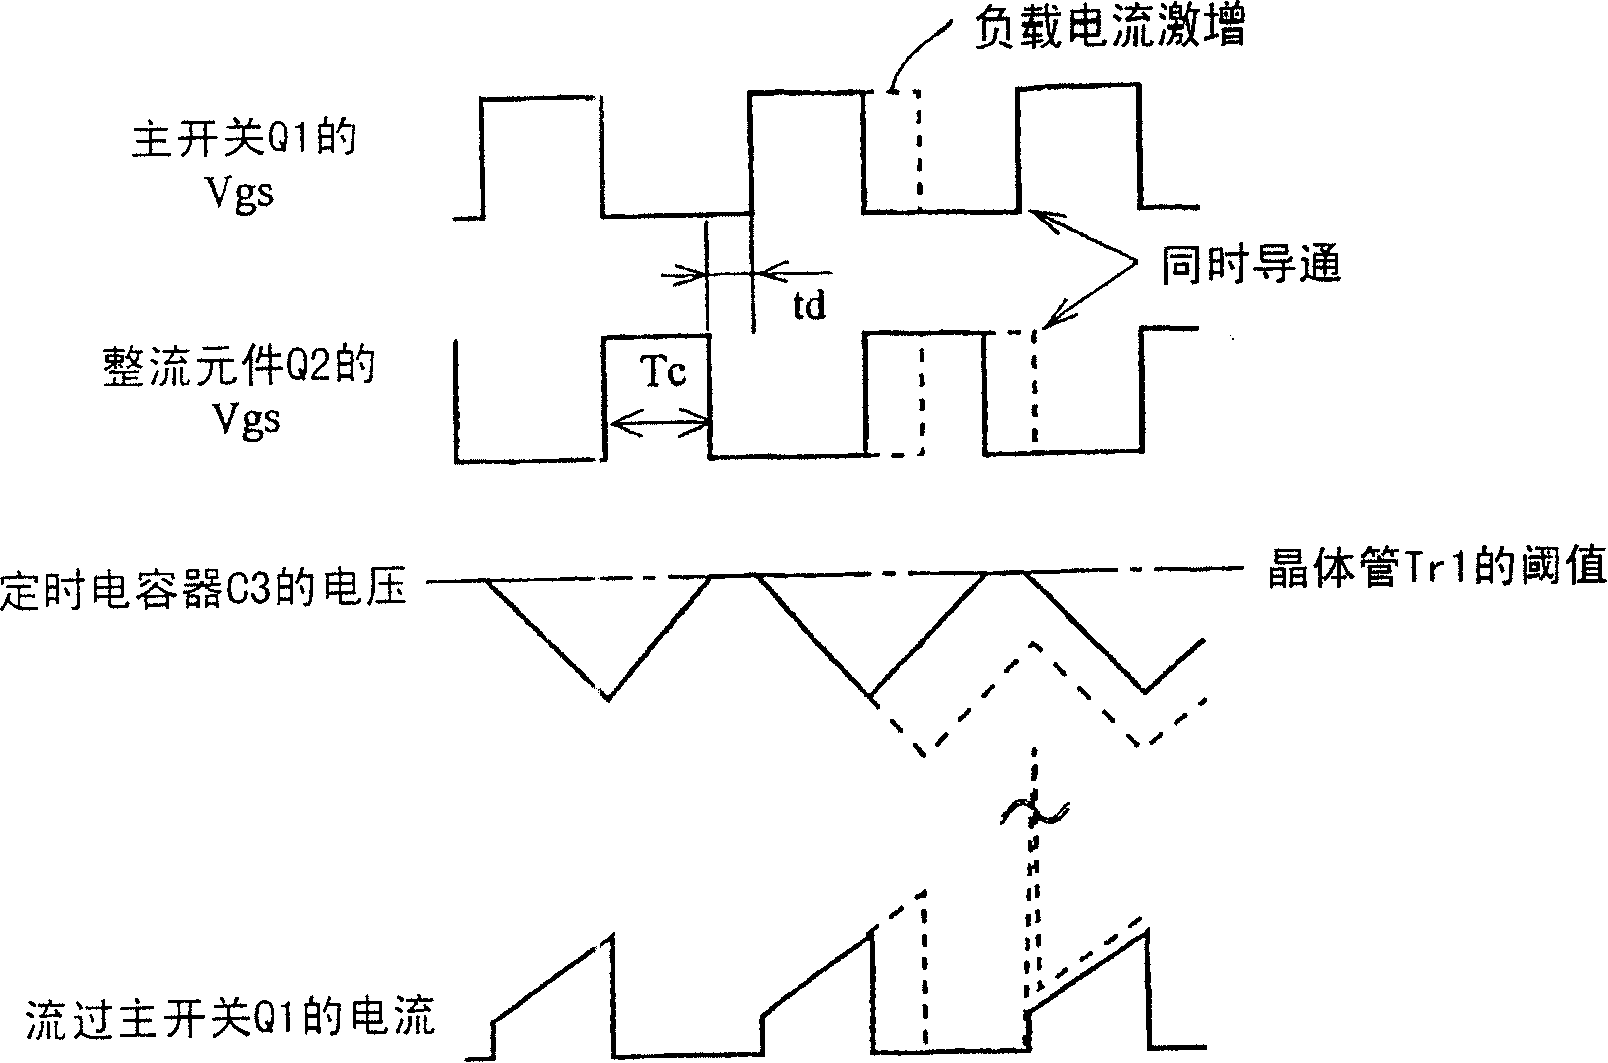 Synchronous rectification switching power supply